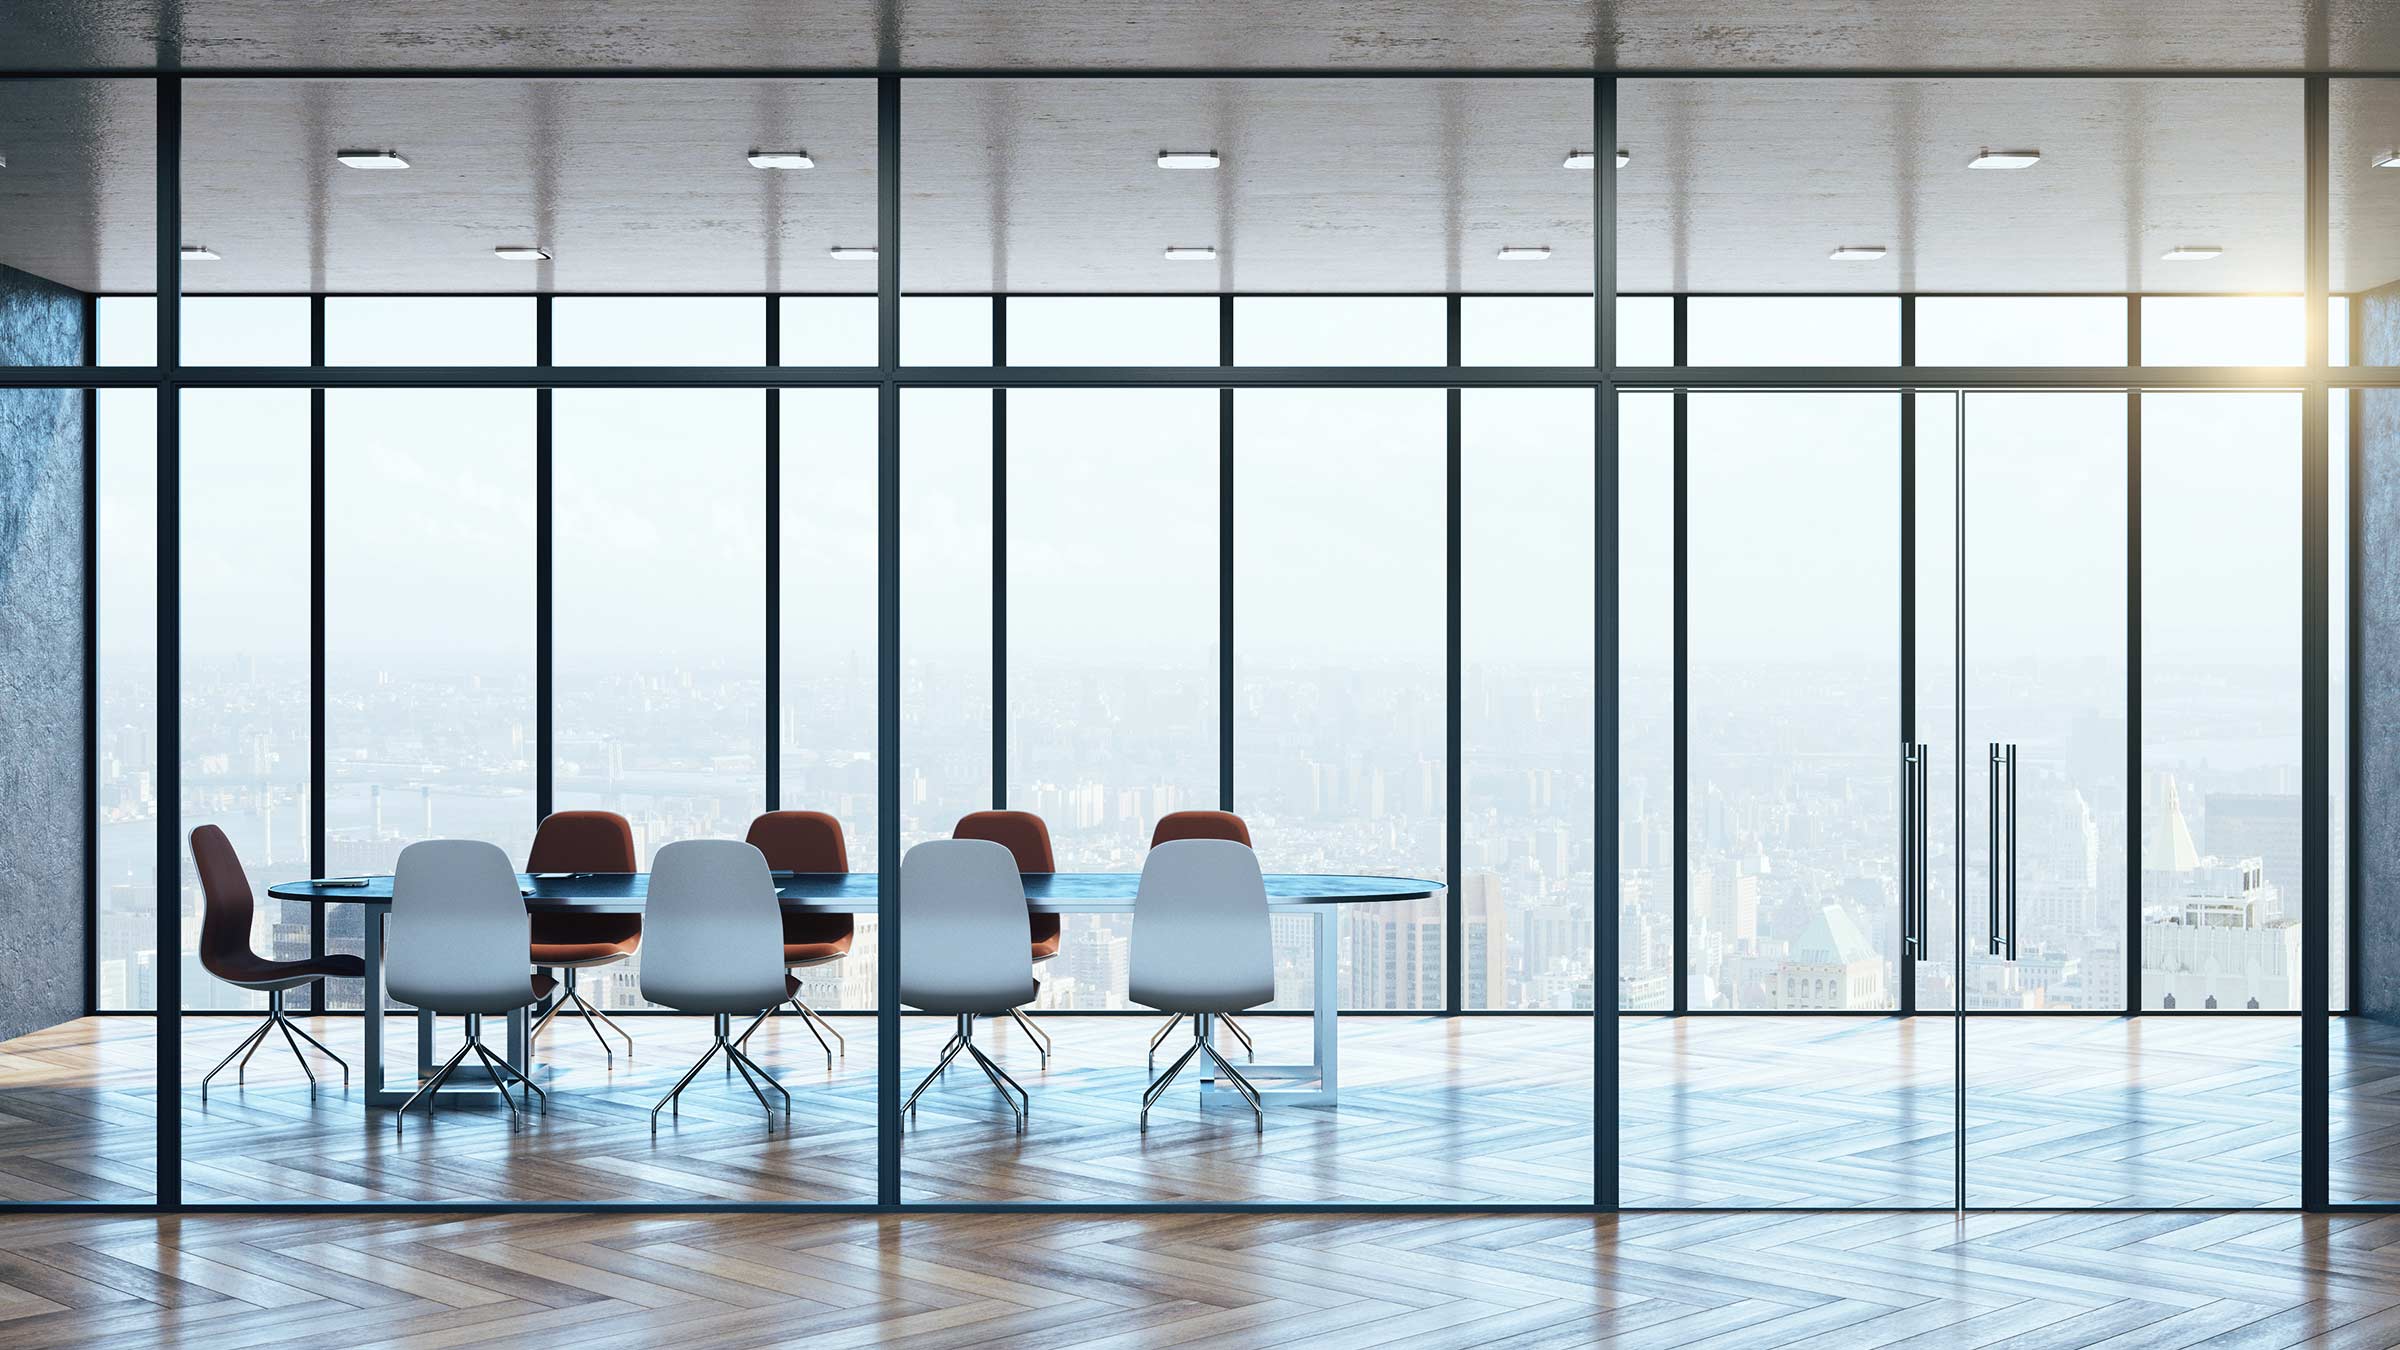 The role of the Non-Executive Board in a crisis